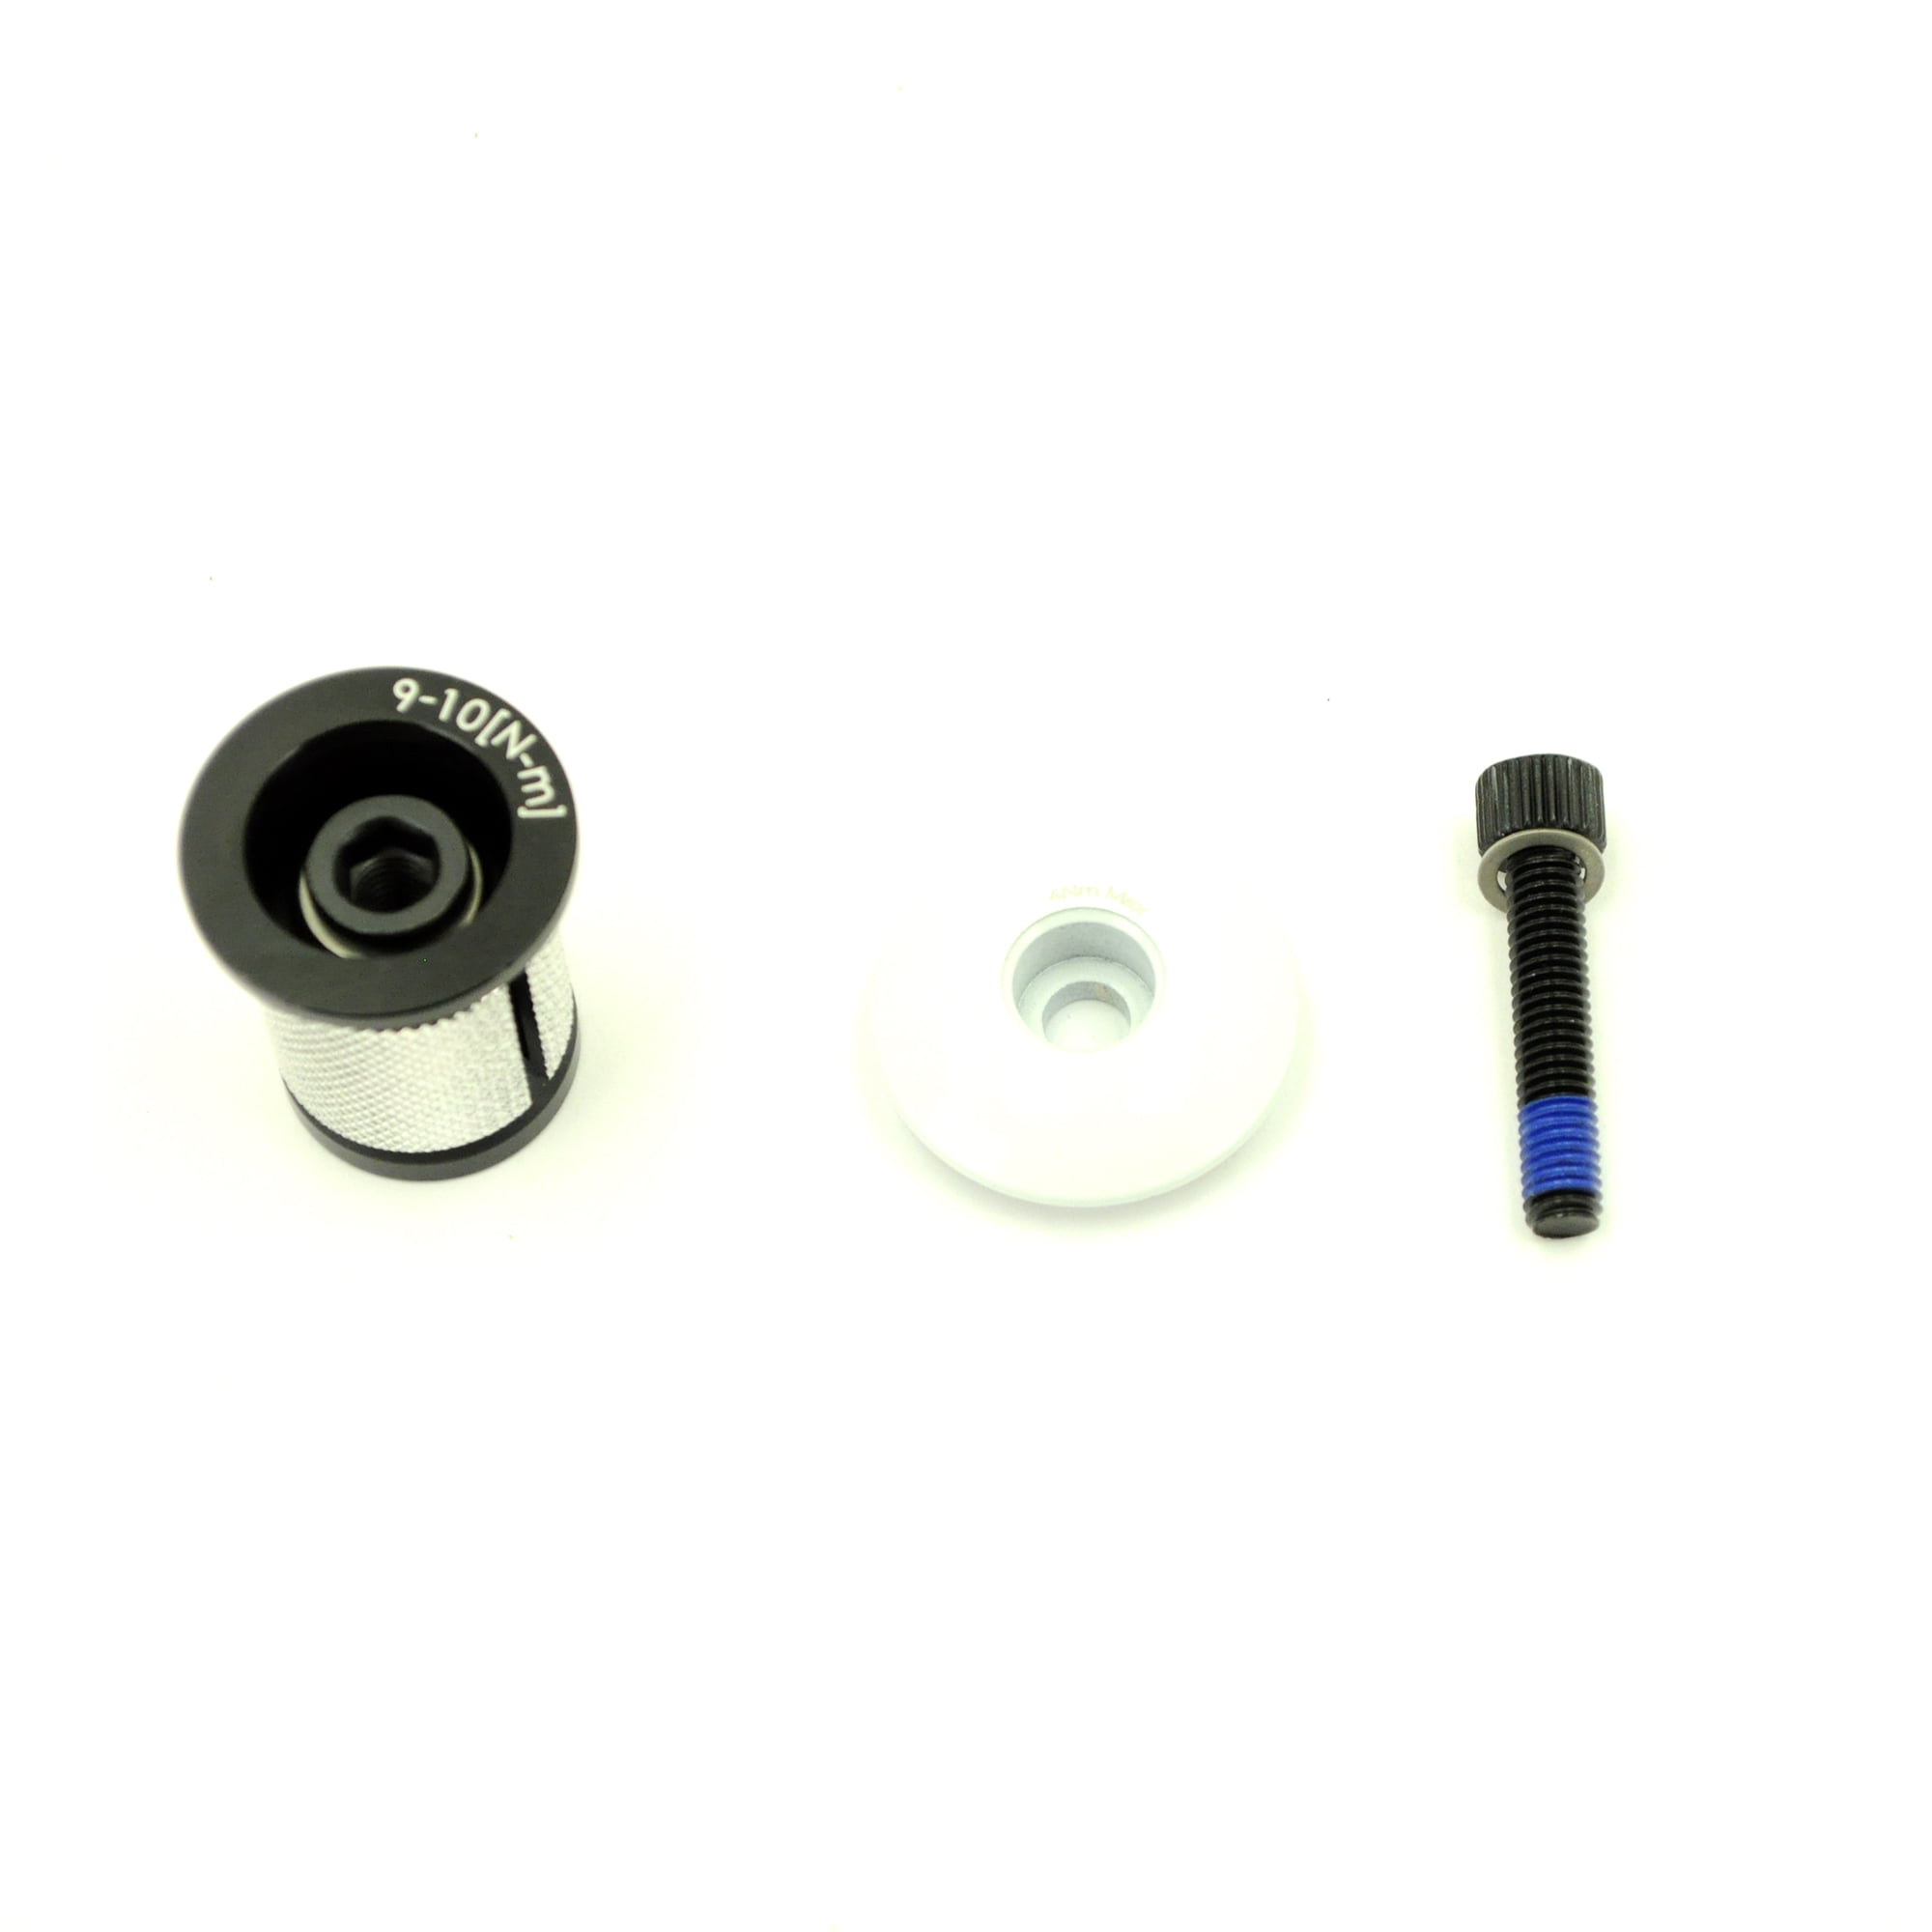 40g   1-1/8" CARBON TOP   Headset Cap with Expander BLACK 28.6MM 